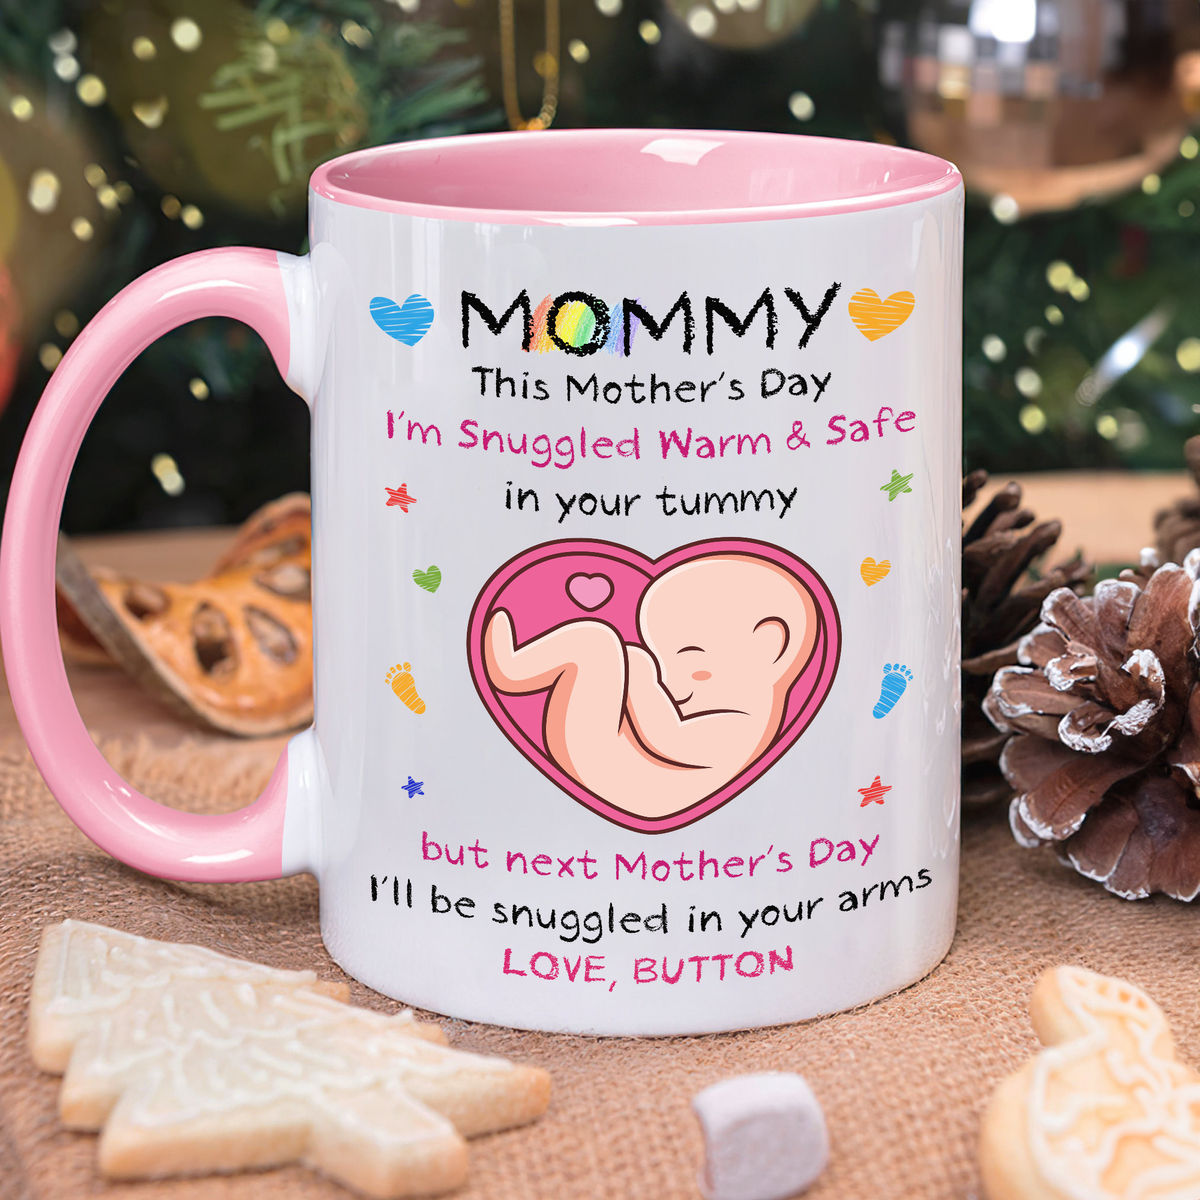 Personalized Mug - From The Bump - Mommy, This Mother's Day I'm Snuggled Warm & Safe In Your Tummy. But next Mother's Day, I'll be Snuggled in your arms (v2)